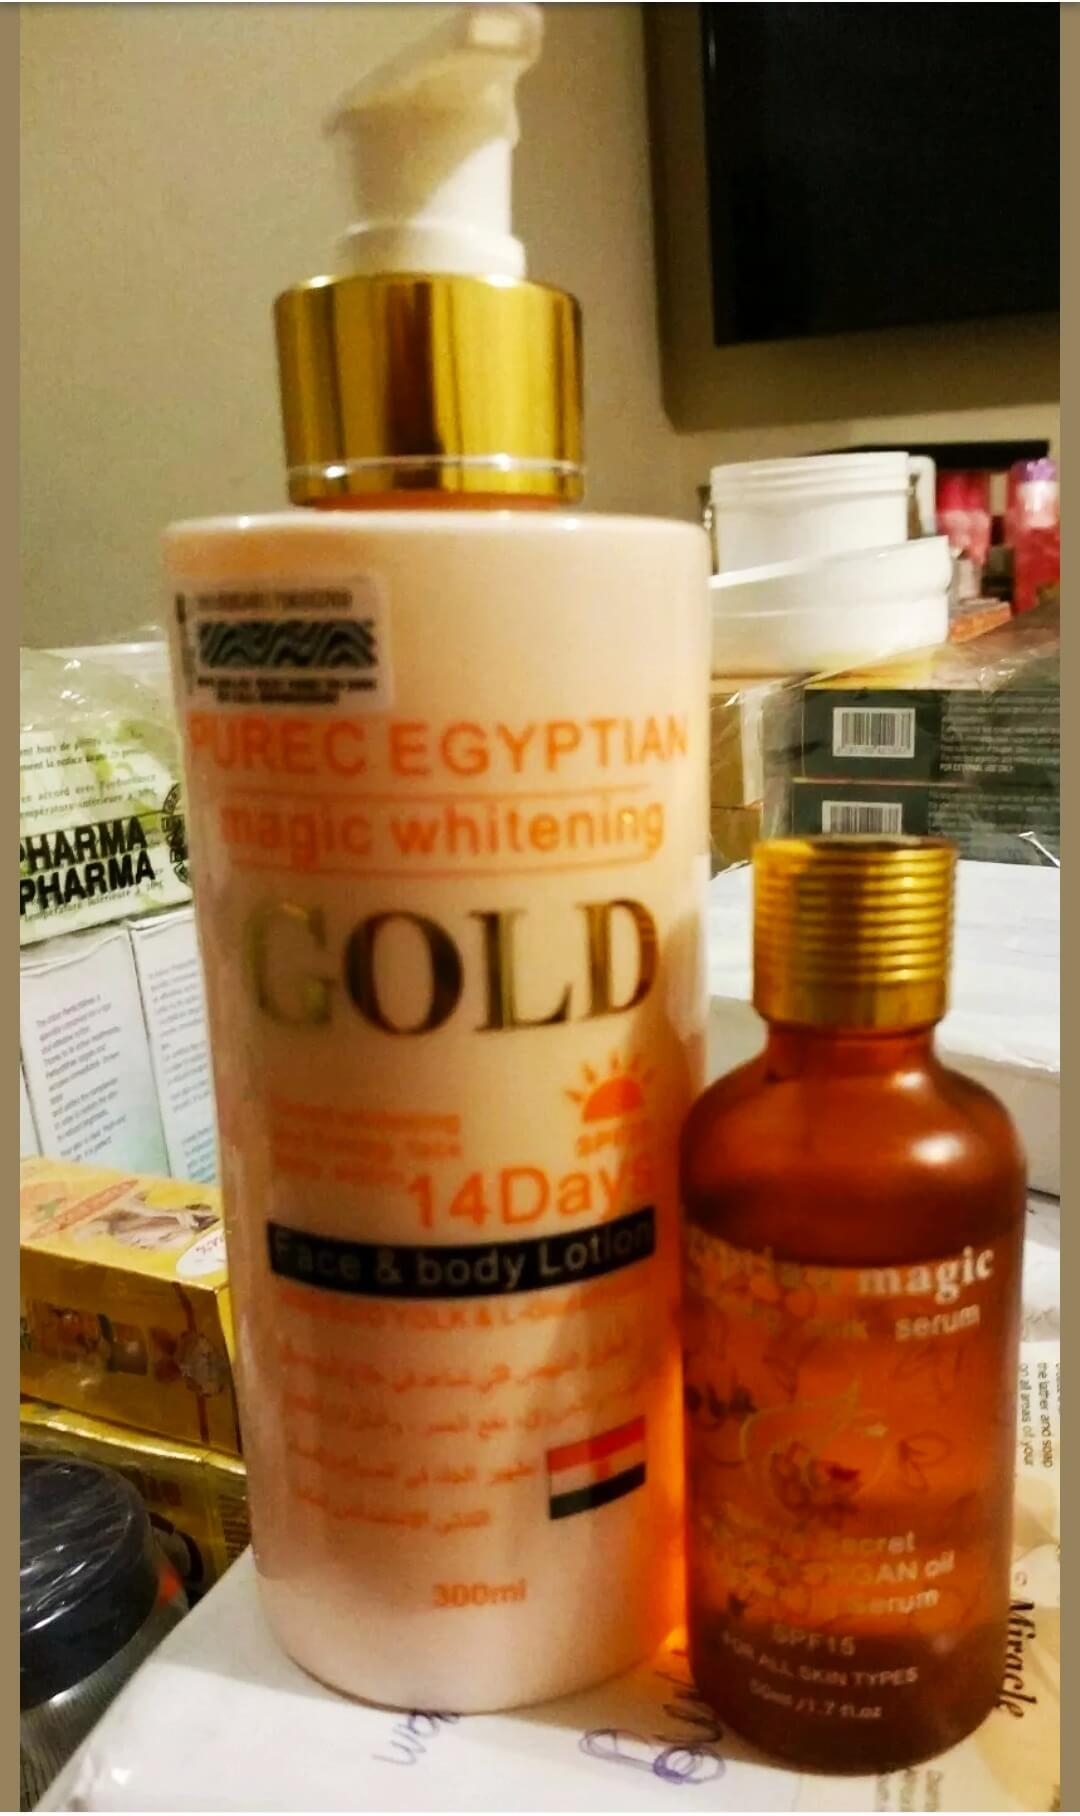 Pure Egyptian Magic Whitening Gold Lotion + Oil